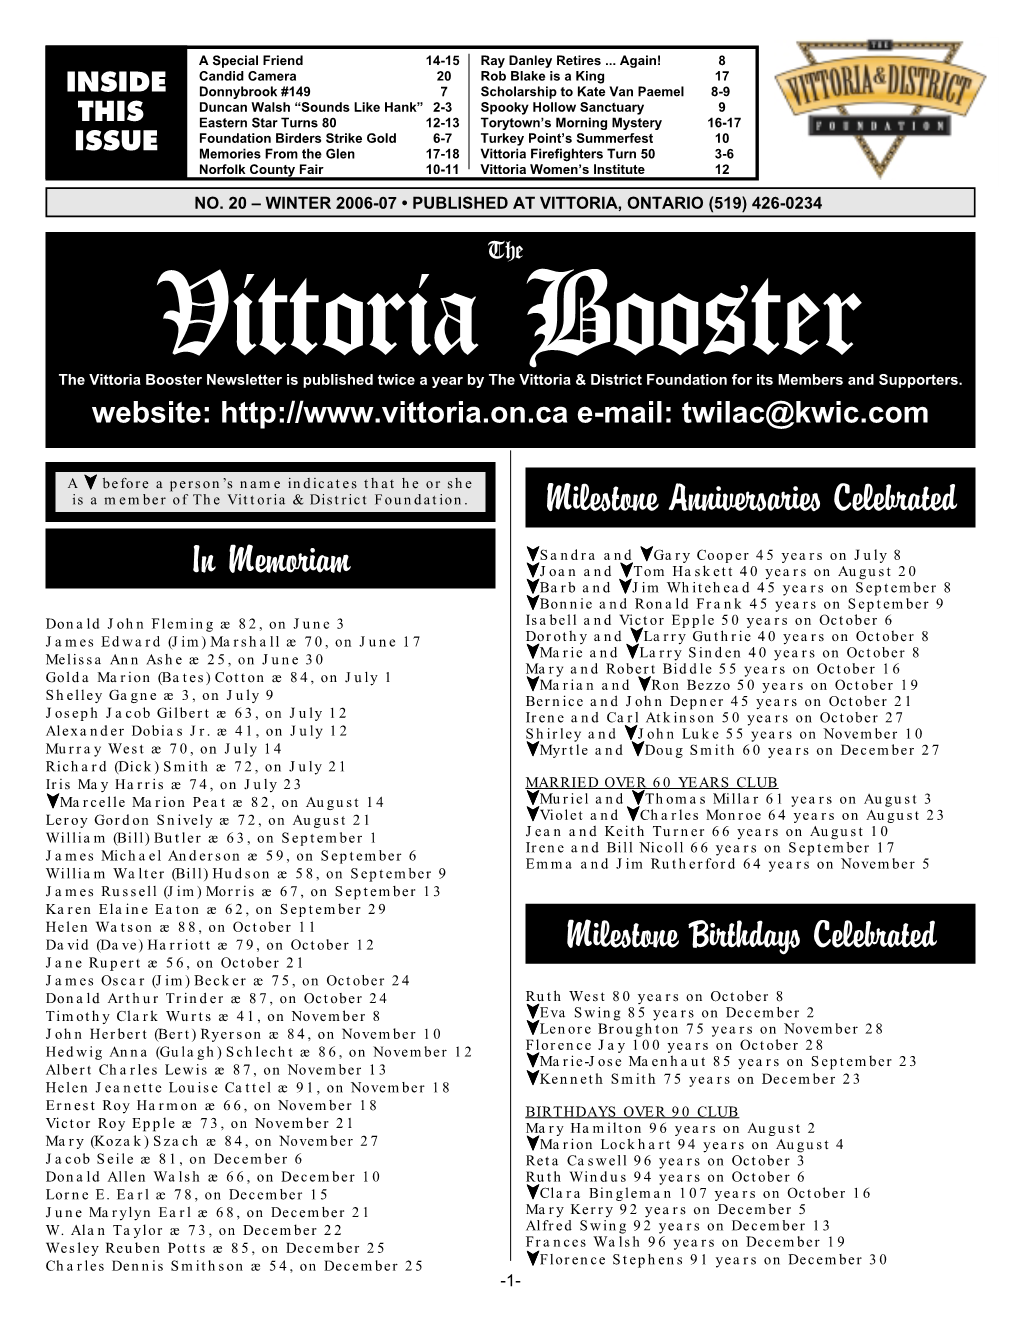 Vittoria Booster the Vittoria Booster Newsletter Is Published Twice a Year by the Vittoria & District Foundation for Its Members and Supporters